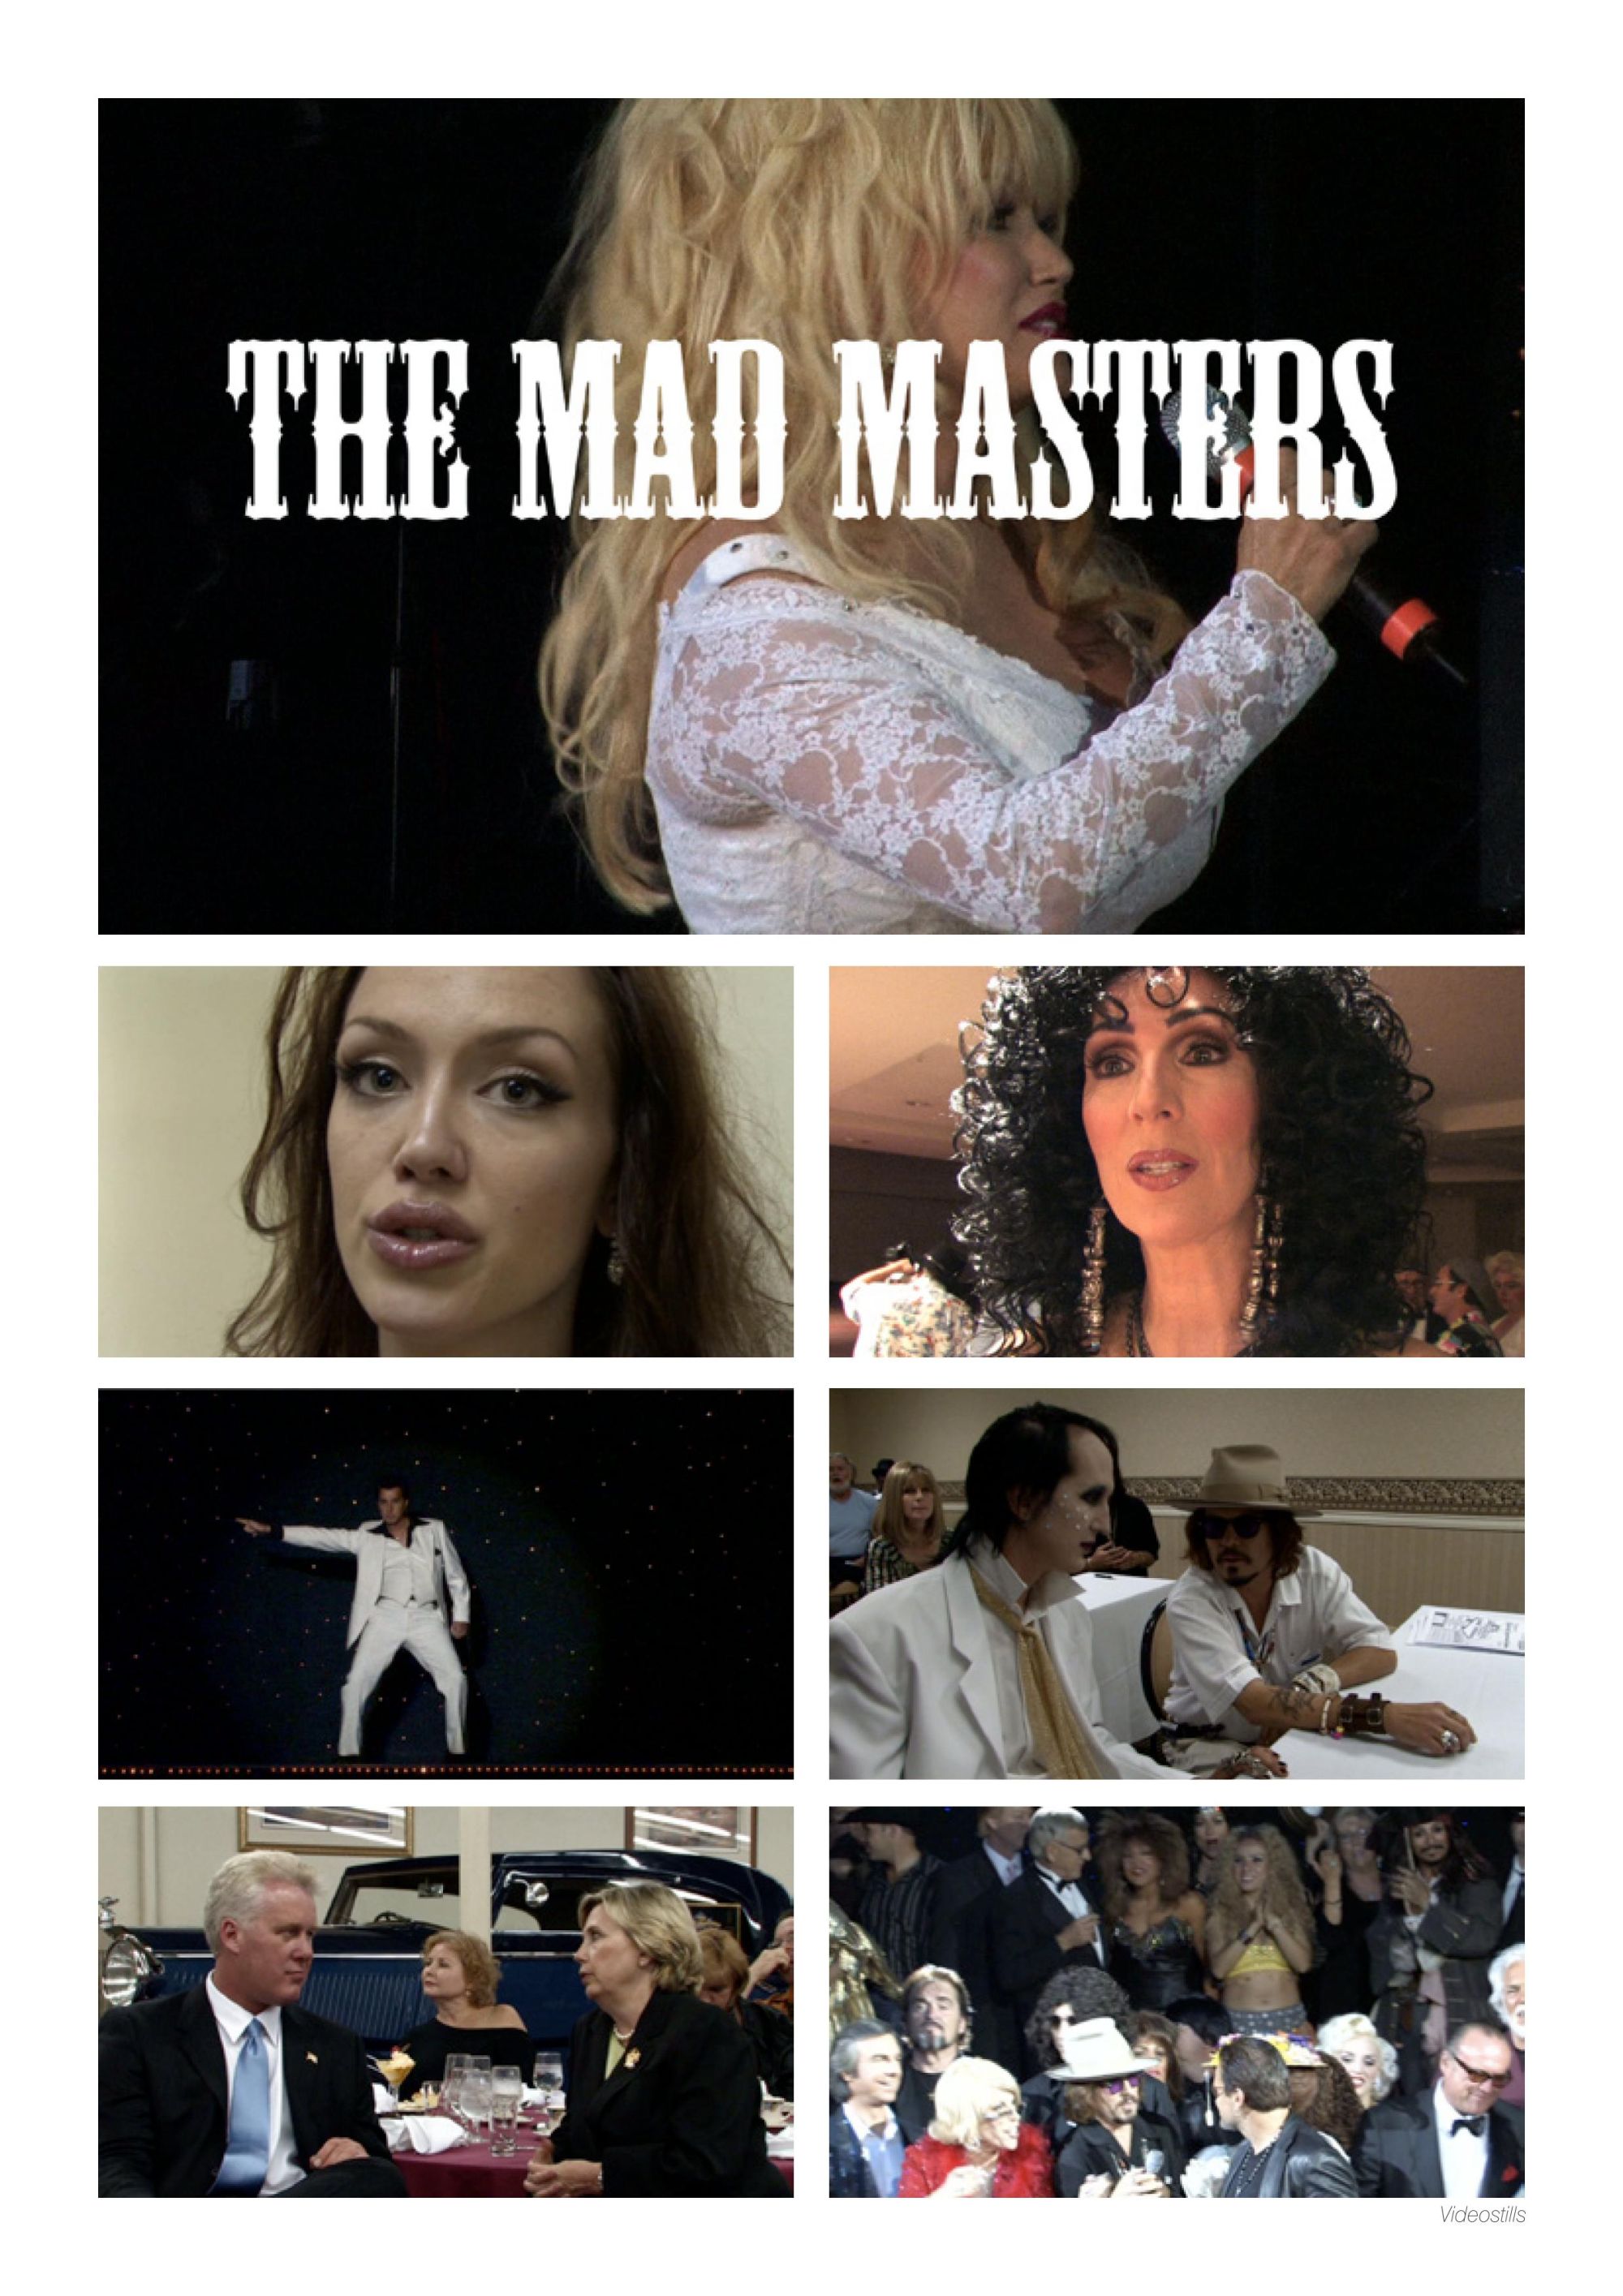 THE MAD MASTERS